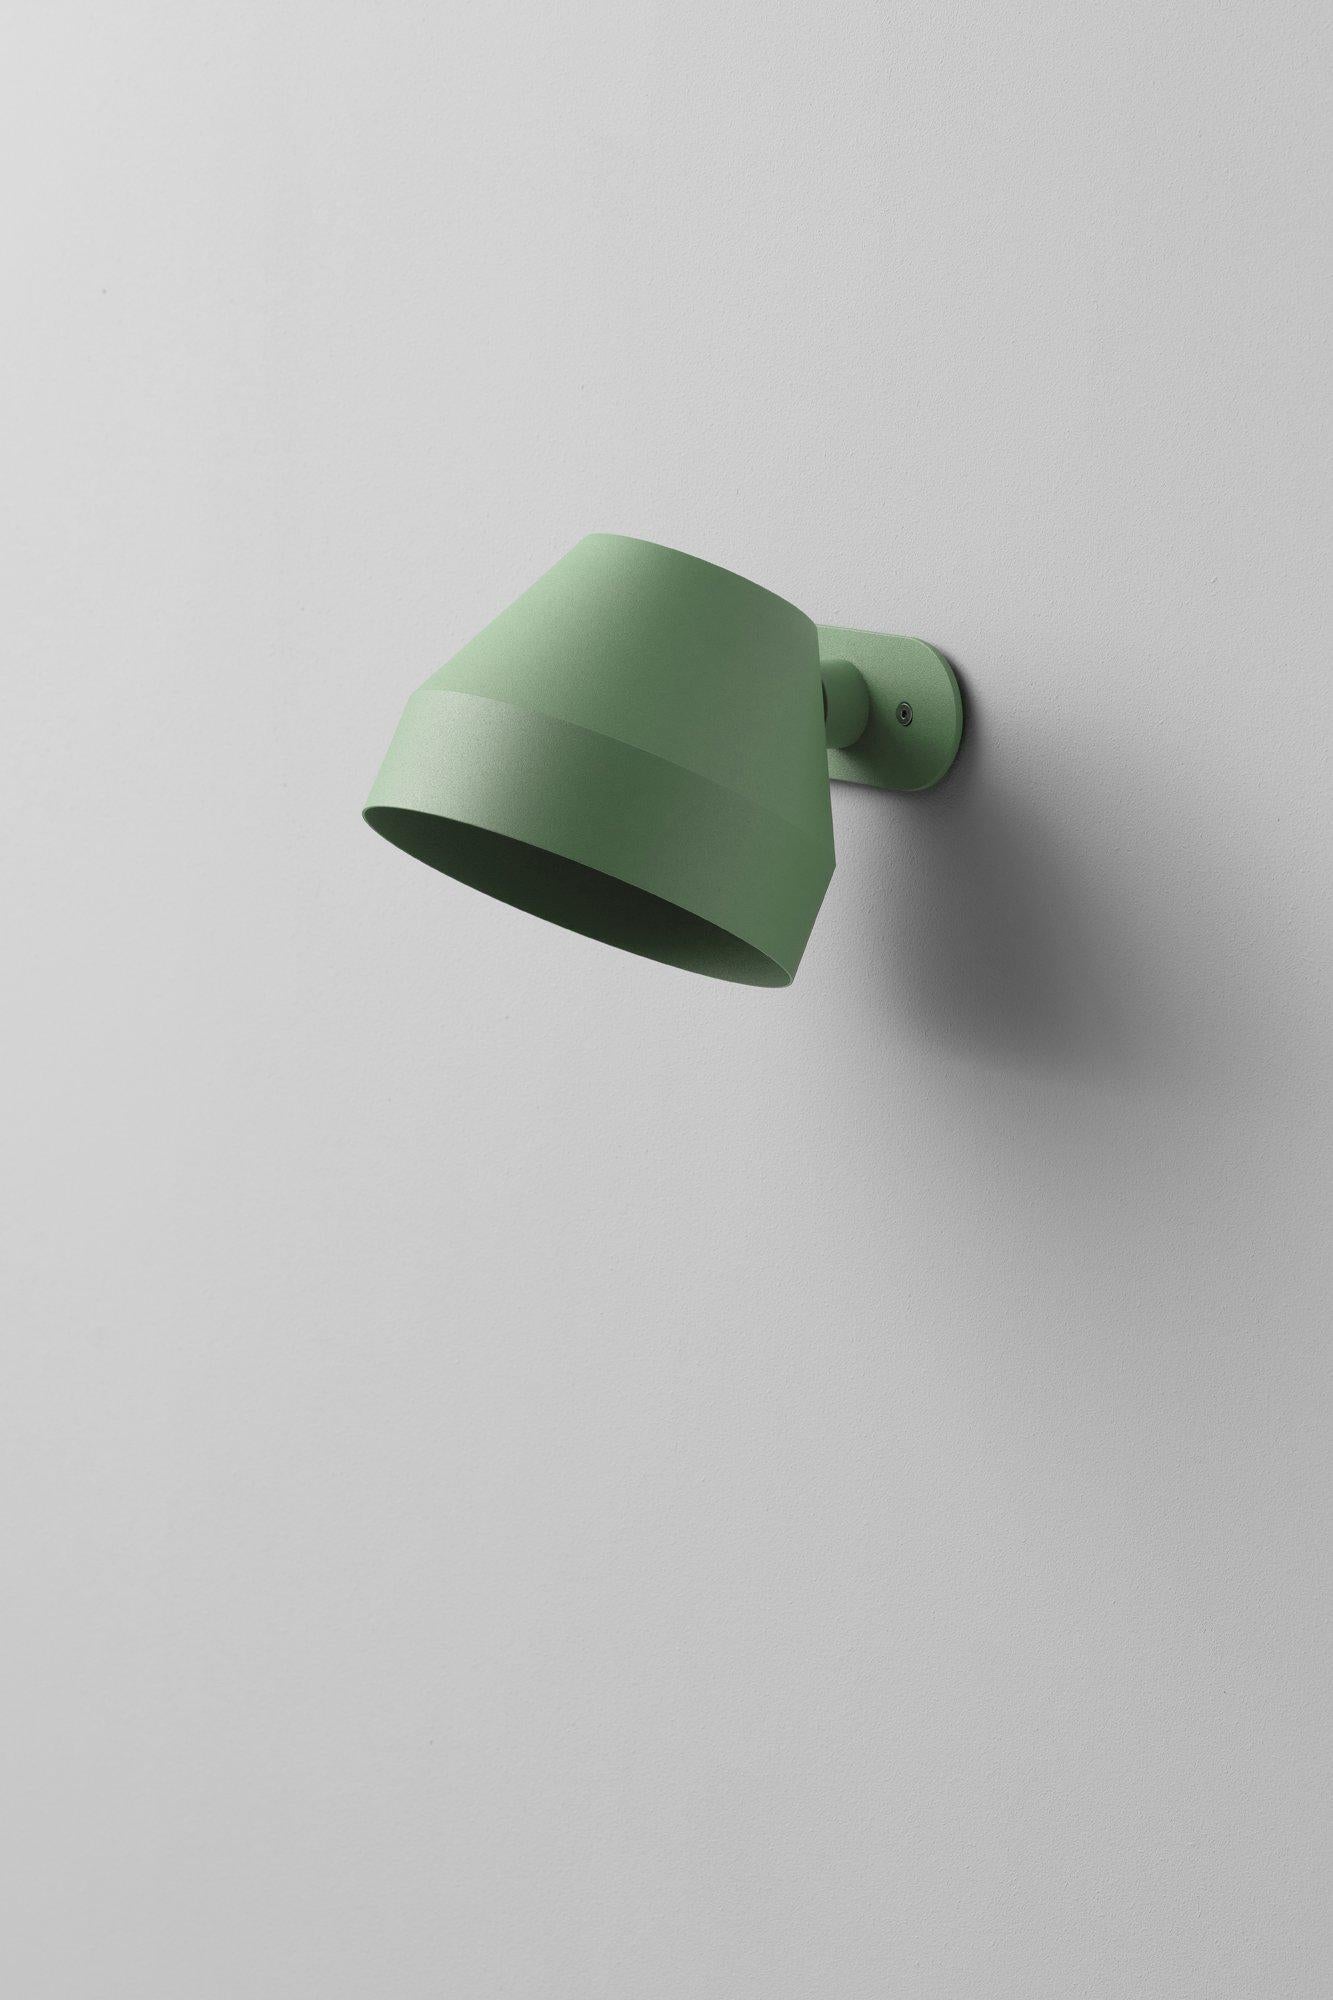 Moss Cap Wall Lamp by +kouple
Dimensions: D 20 x W 16 x H 16,2 cm.
Materials: Powder-coated steel.

Available in different color options. Please contact us.

All our lamps can be wired according to each country. If sold to the USA it will be wired